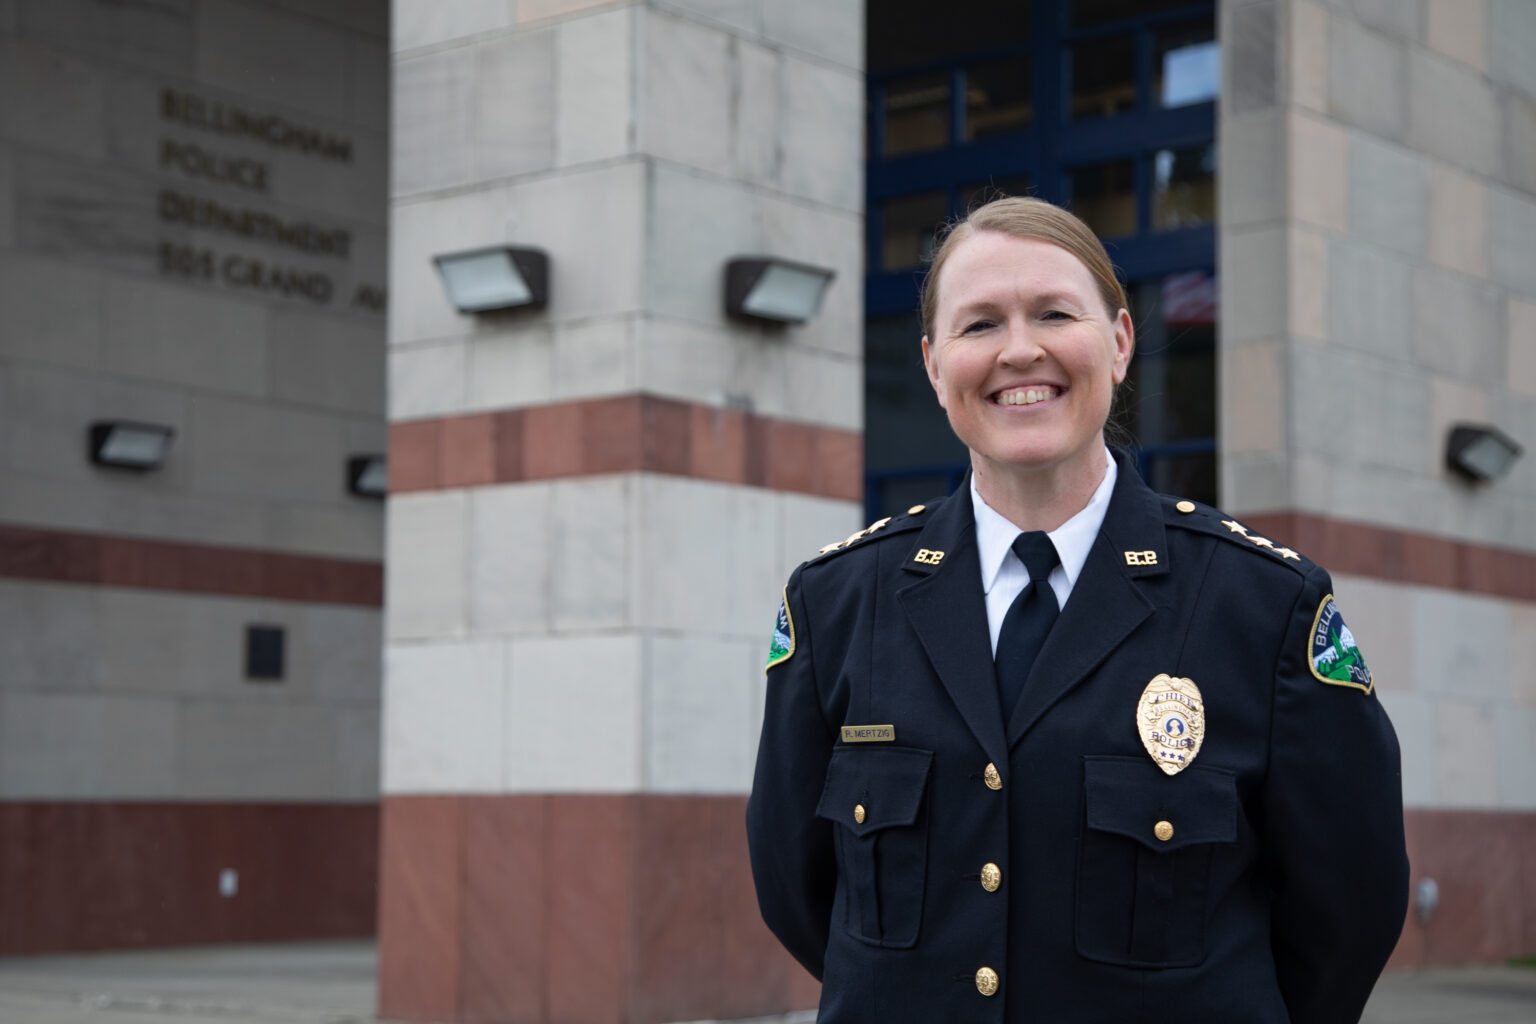 Rebecca Mertzig took over as Bellingham's police chief in June 2022. "She’s a strong